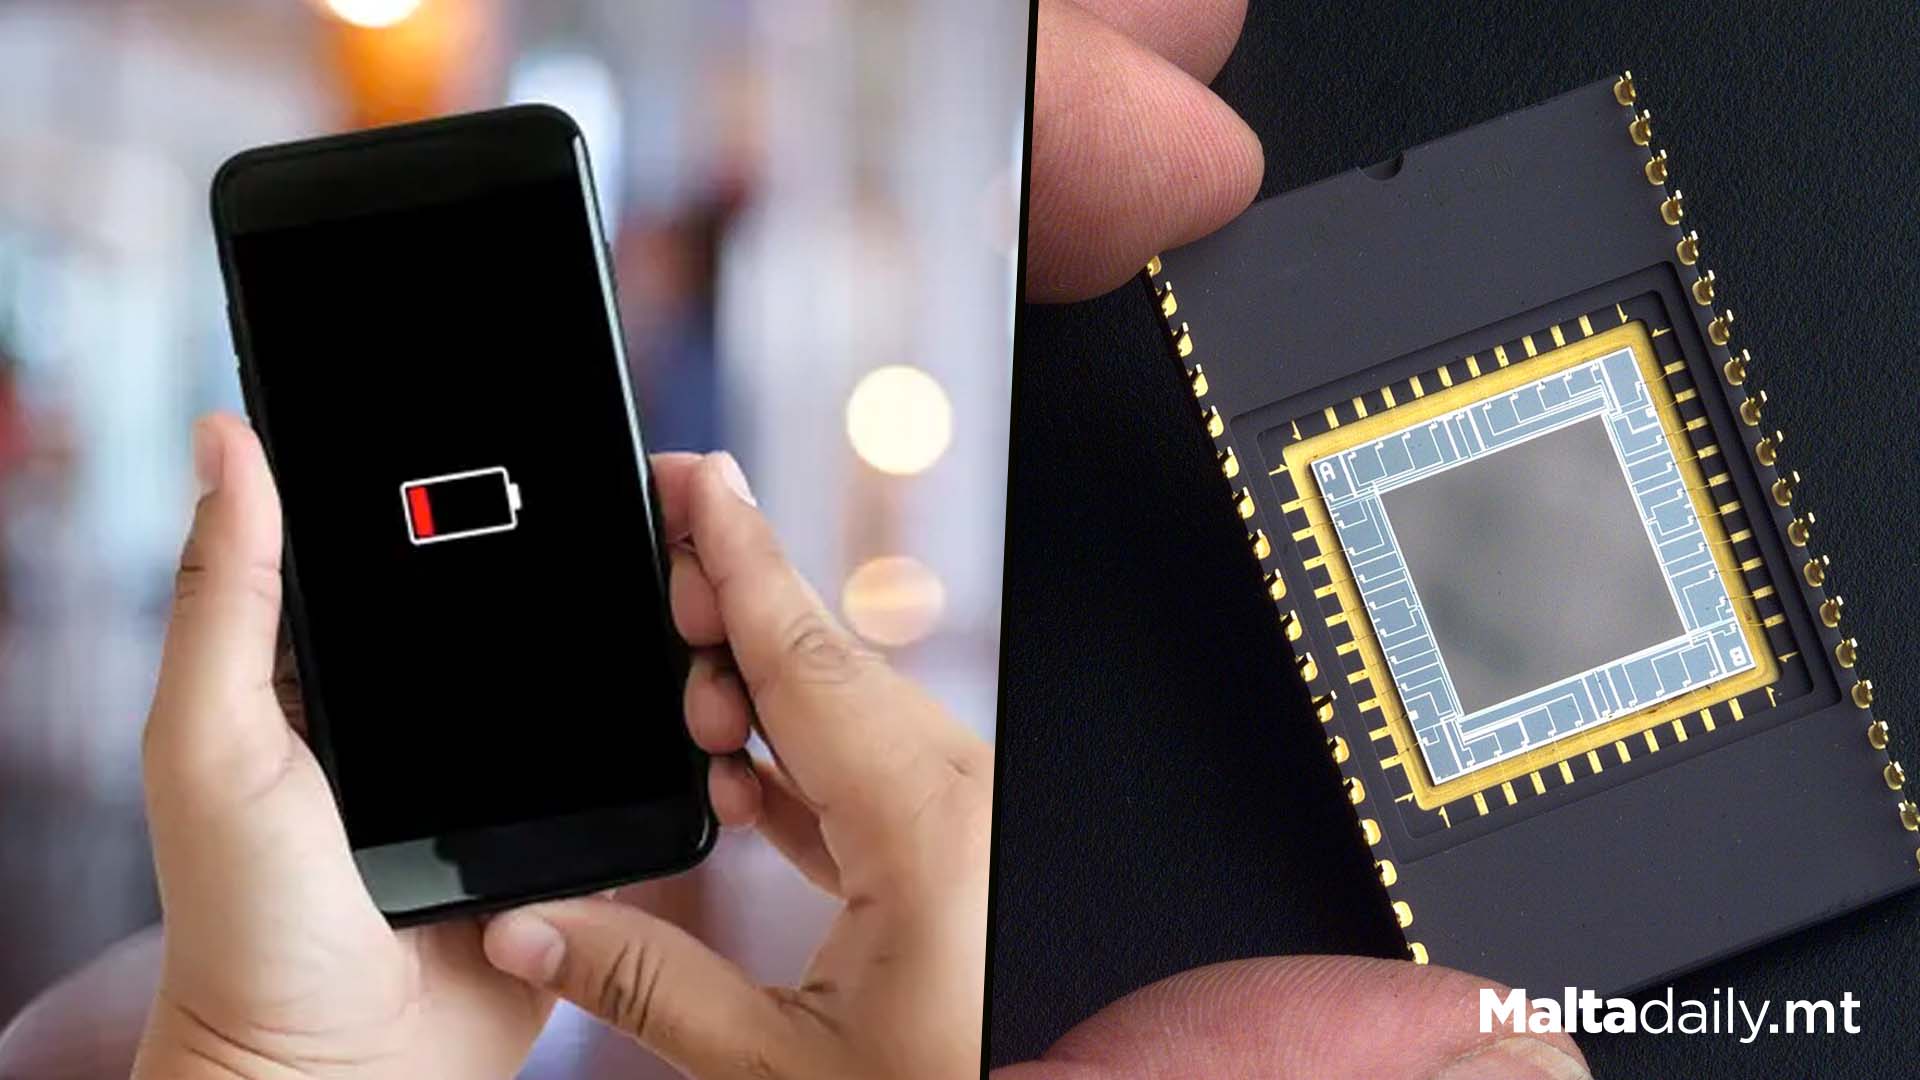 Microchip That Makes Phone Batteries Go 1 Month Without Charging Being Developed